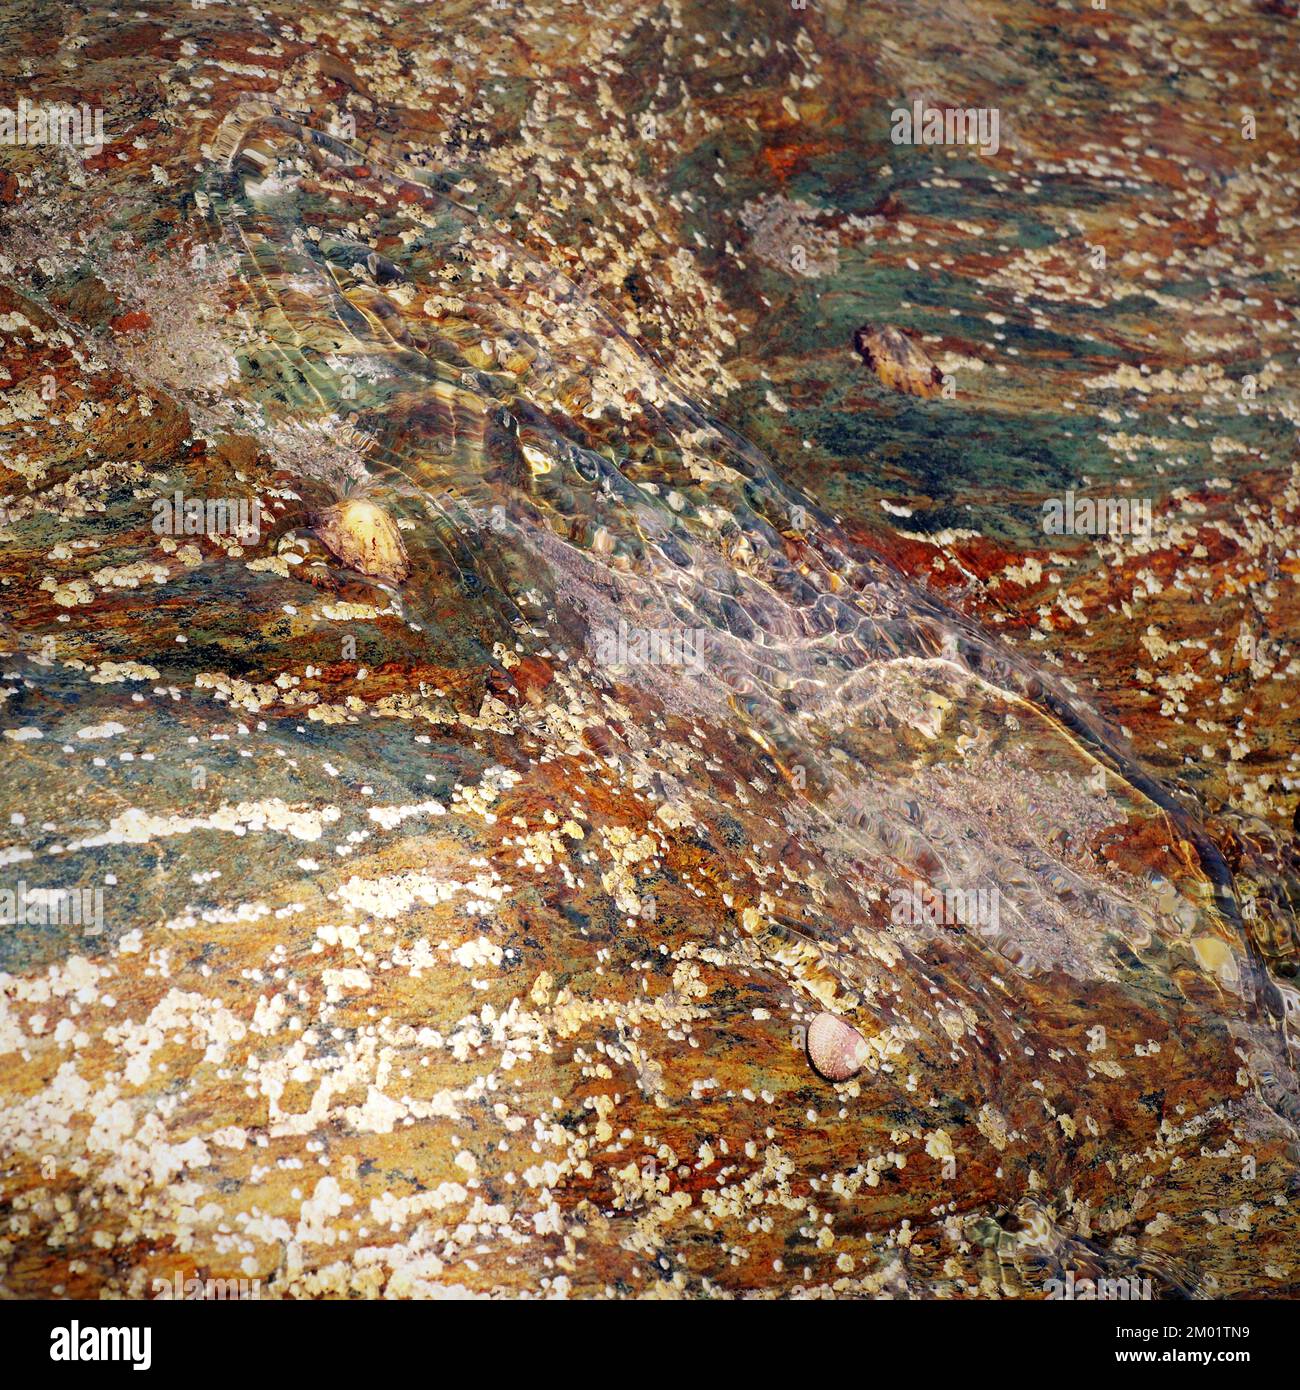 Abstract colour photograph of coastal rock the image is a colour abstract with a near impressionism style, containing rock patterns and textures. Stock Photo